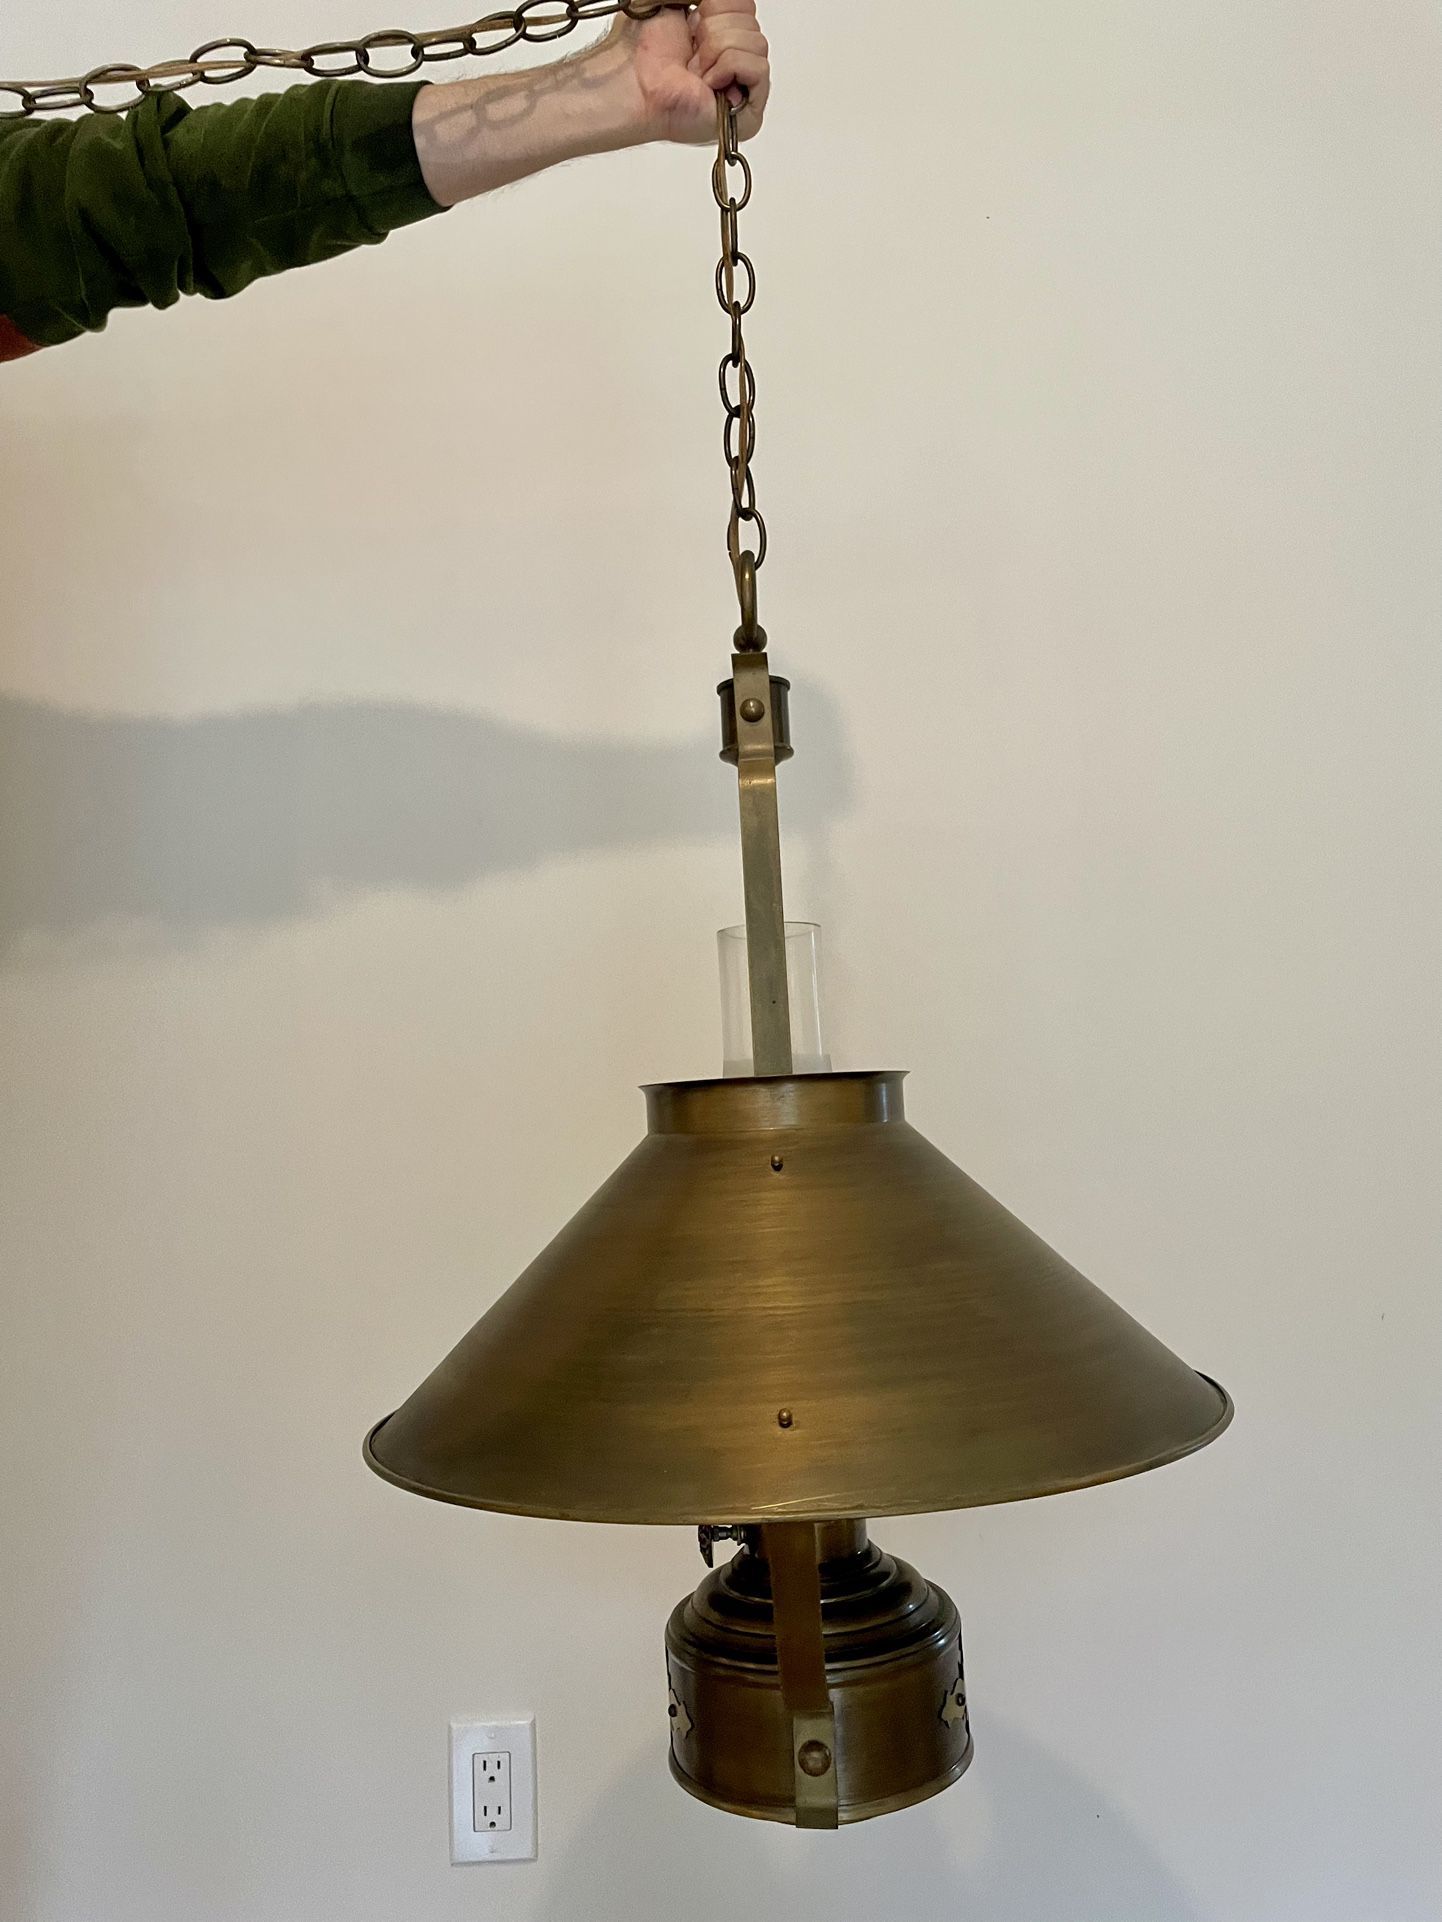 Vintage Pendant Statement Ceiling Light Brass - Needs to be rewired